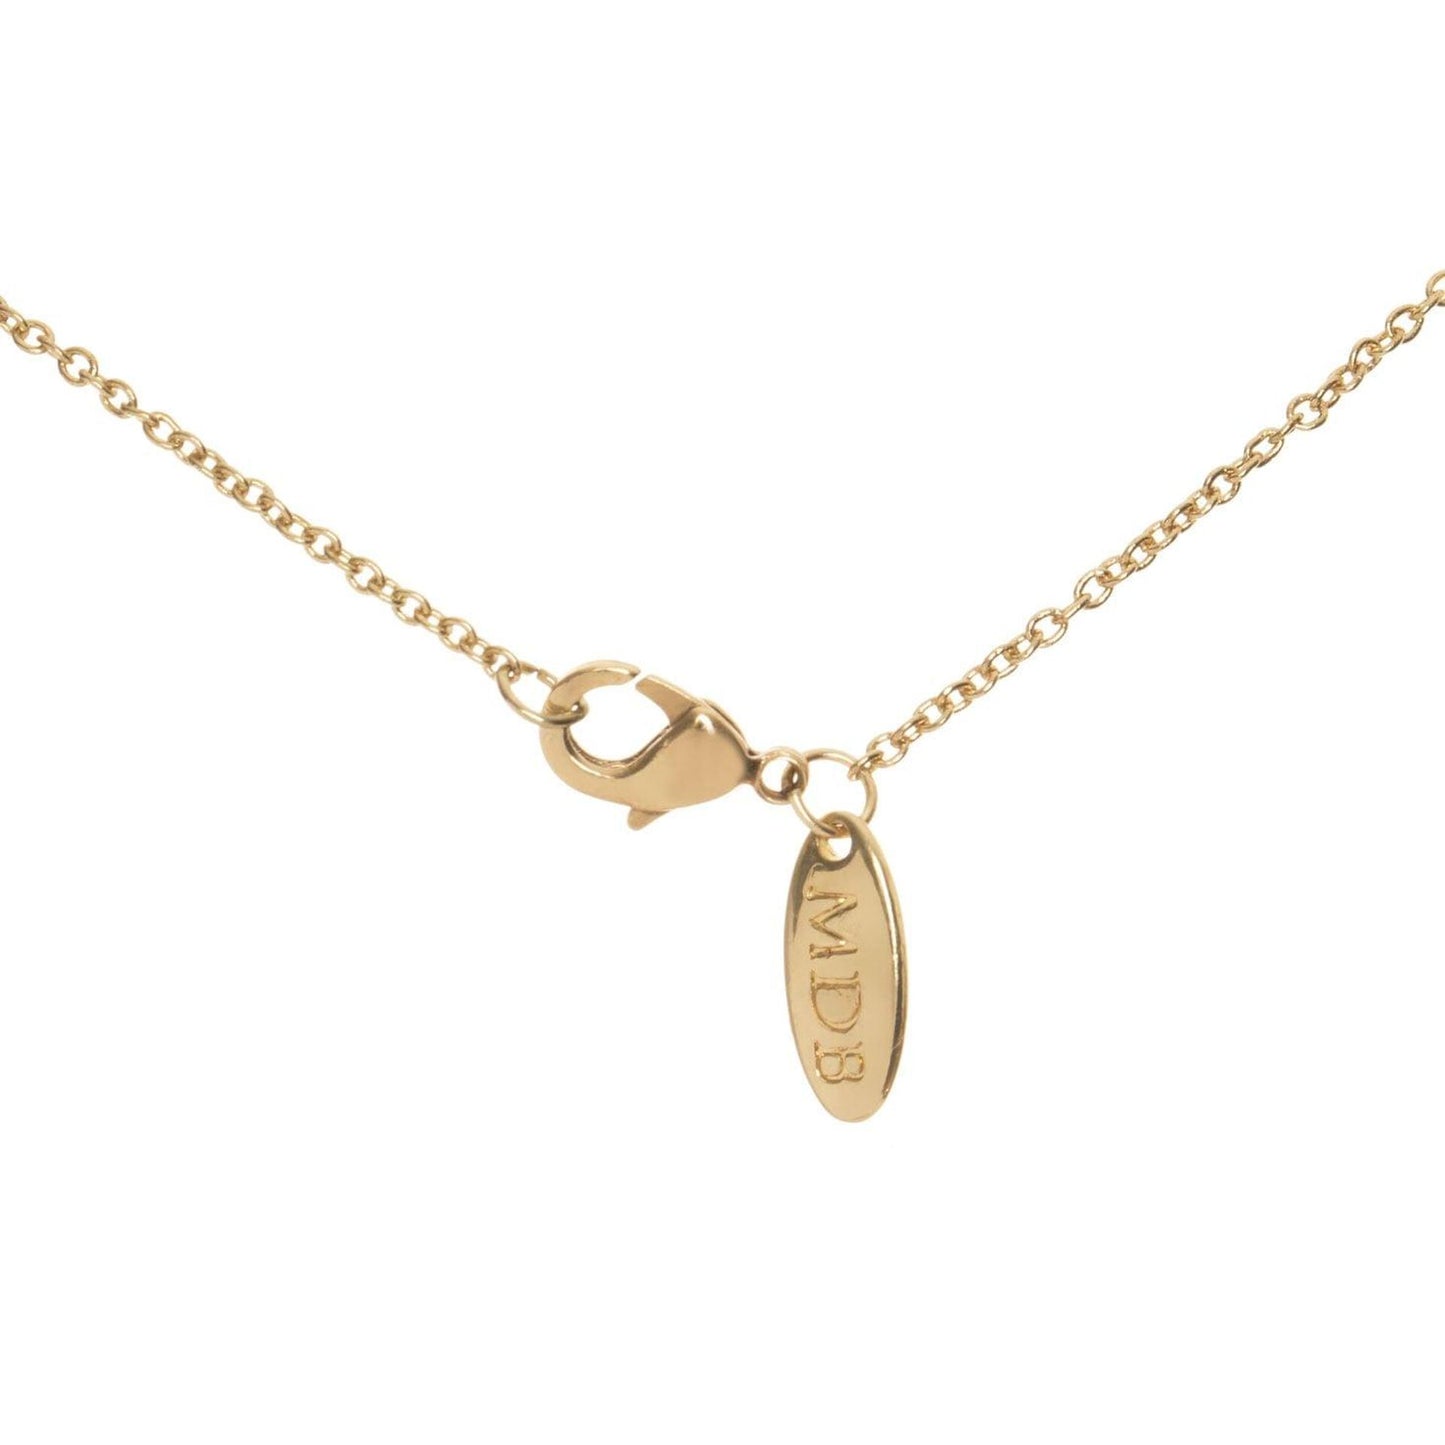 Lumiela Personalized Nameplate Mia Necklace in Gold Tone